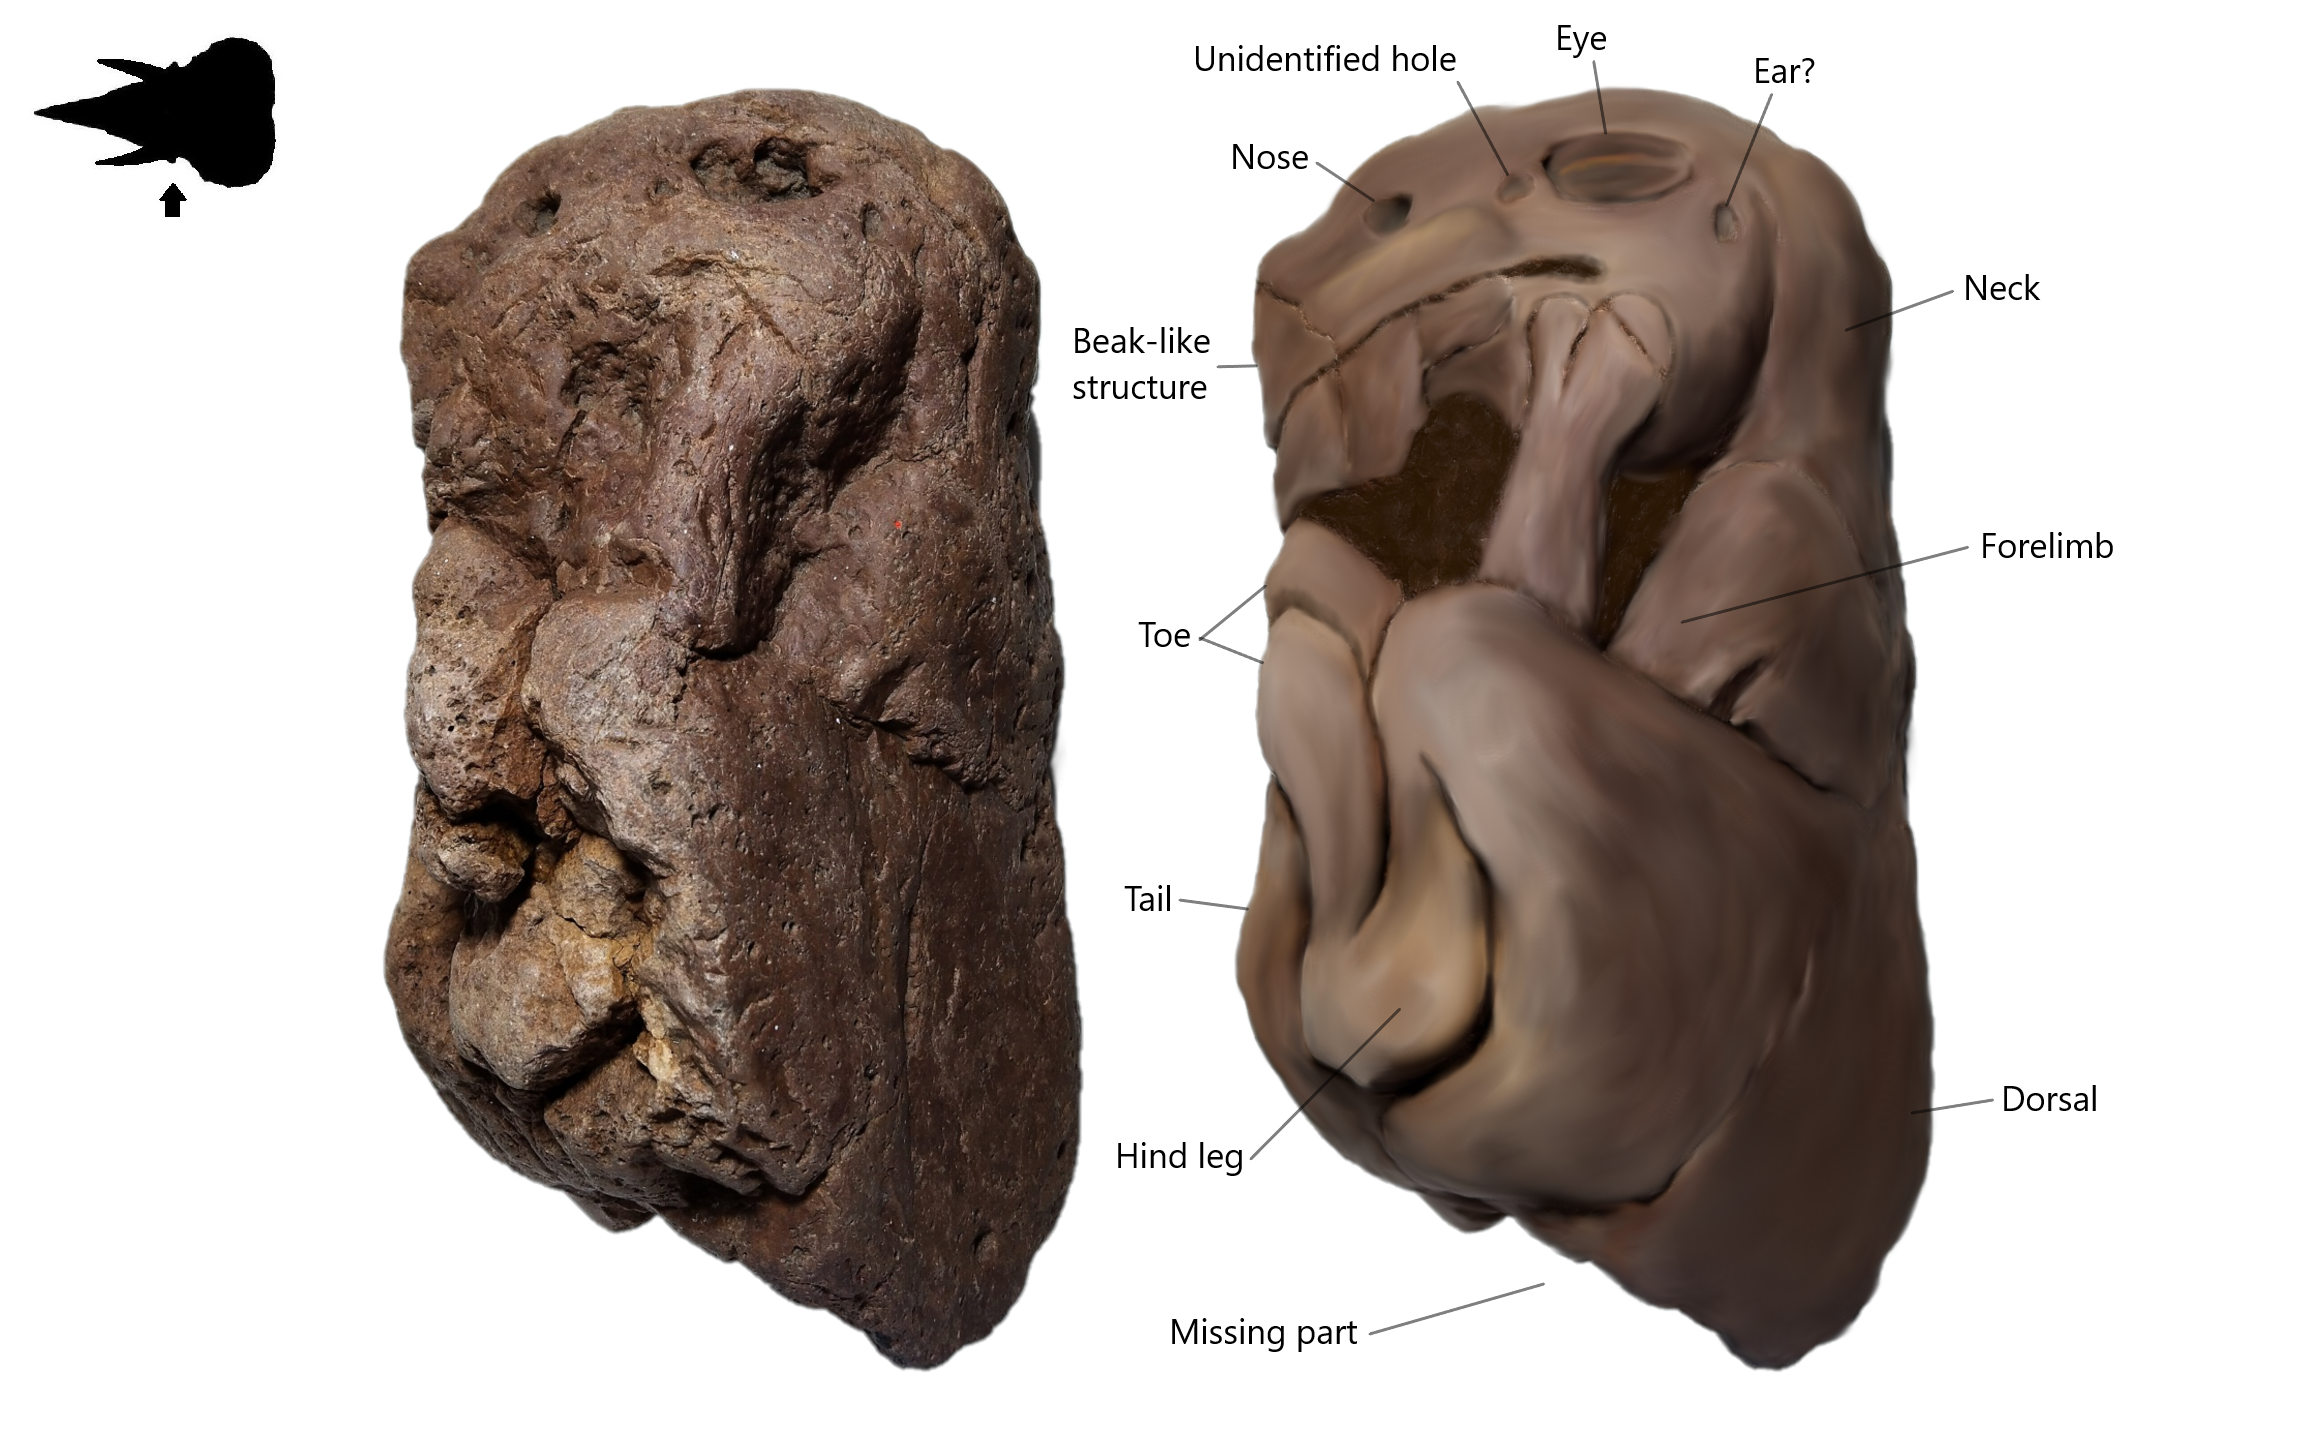 Figure 1. Lateral view (left side) on Brachylophosaurus canadensis embryo with its restoration image. The lower part of body probably gets destroyed or decayed before fully fossilized.